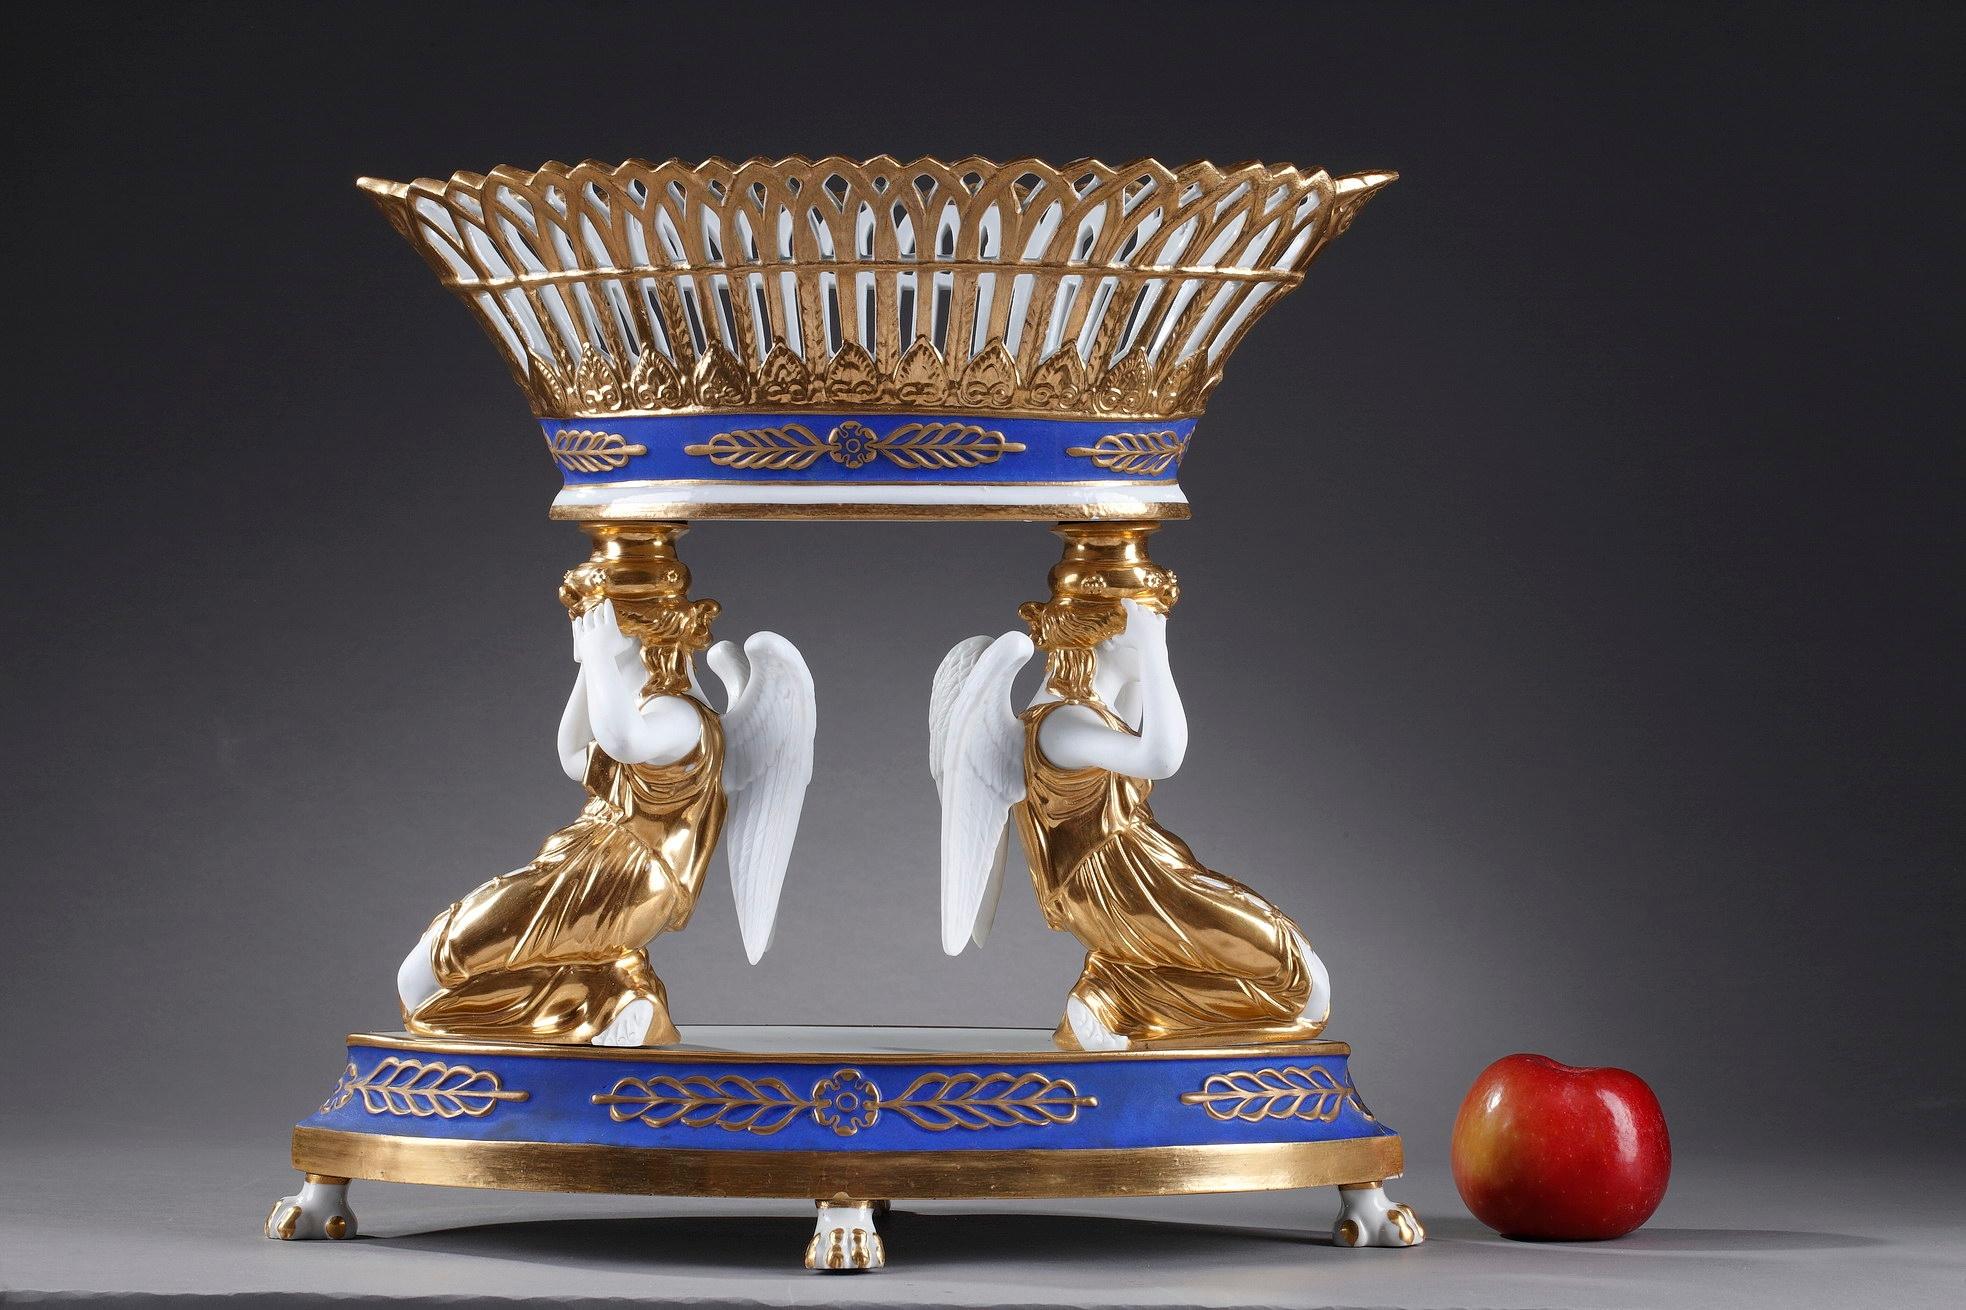 Late 19th century white, blue and gold hard-porcelain centerpiece featuring two winged women holding the pierced basket, highlighted with gold and palmette motif. The table centerpiece is set on an oblong base decorated with palmettes, above four